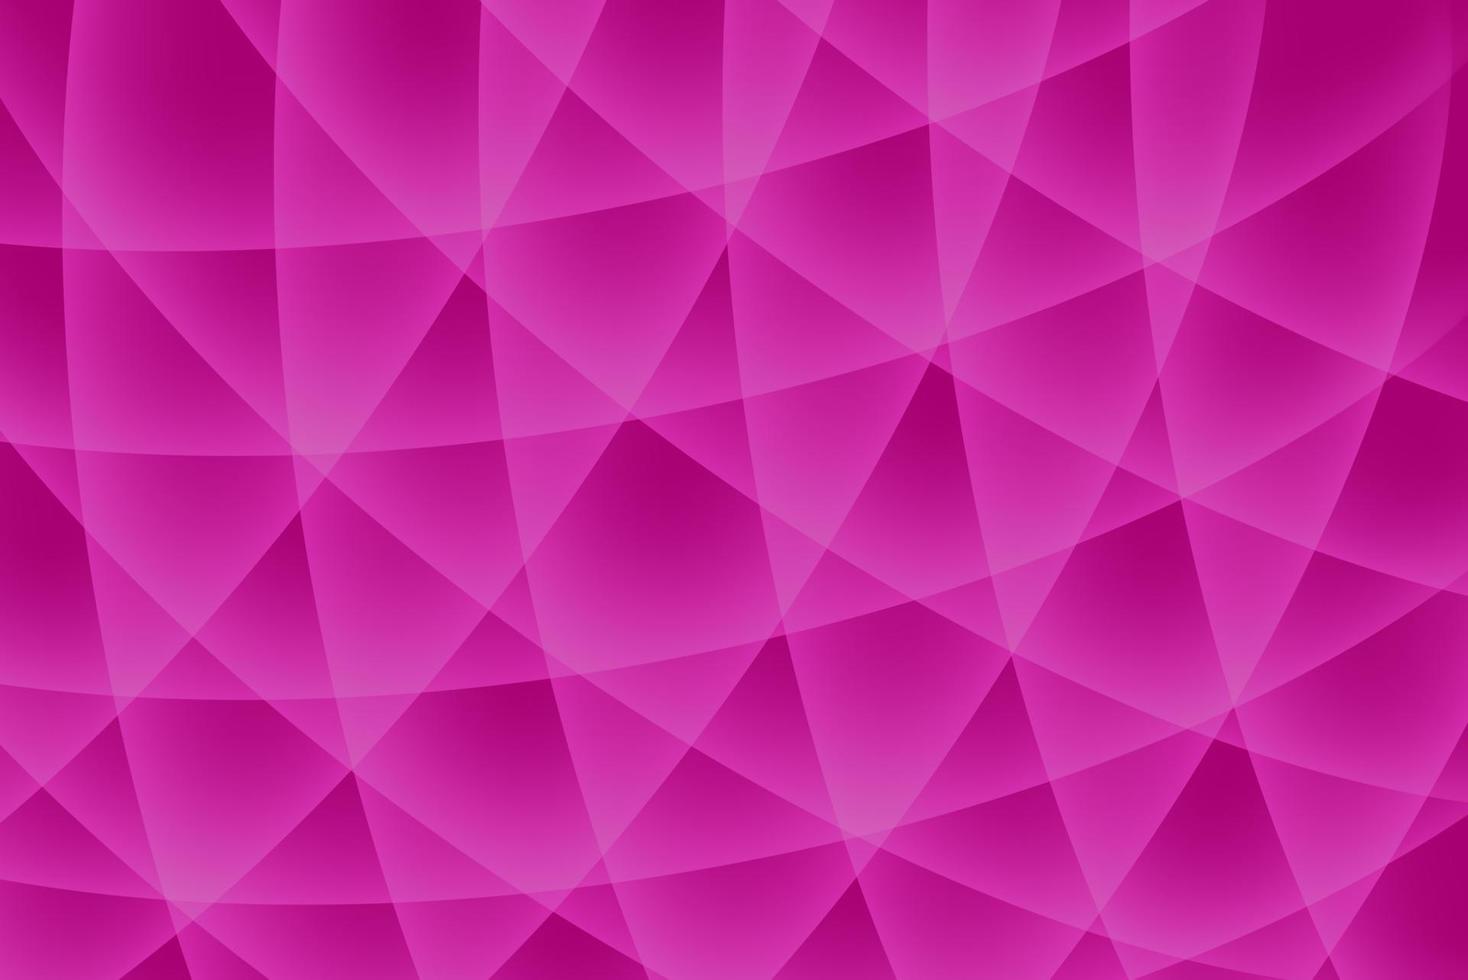 Geometric pink background with triangular polygons. Abstract design. Vector illustration.